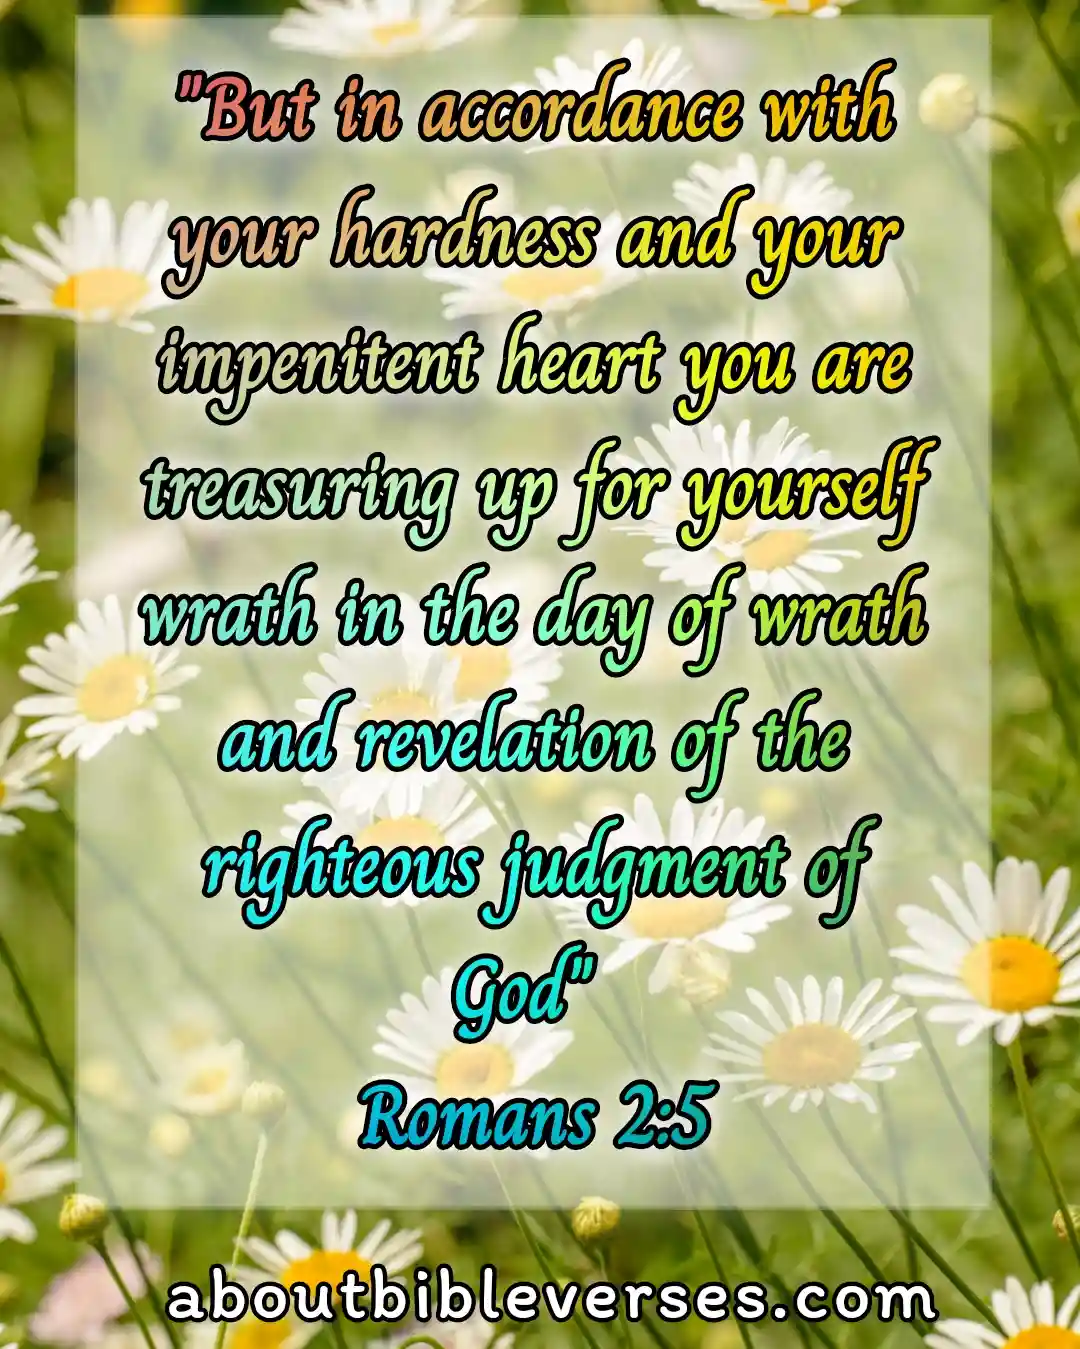 bible verses about your soul and heart (Romans 2:5)